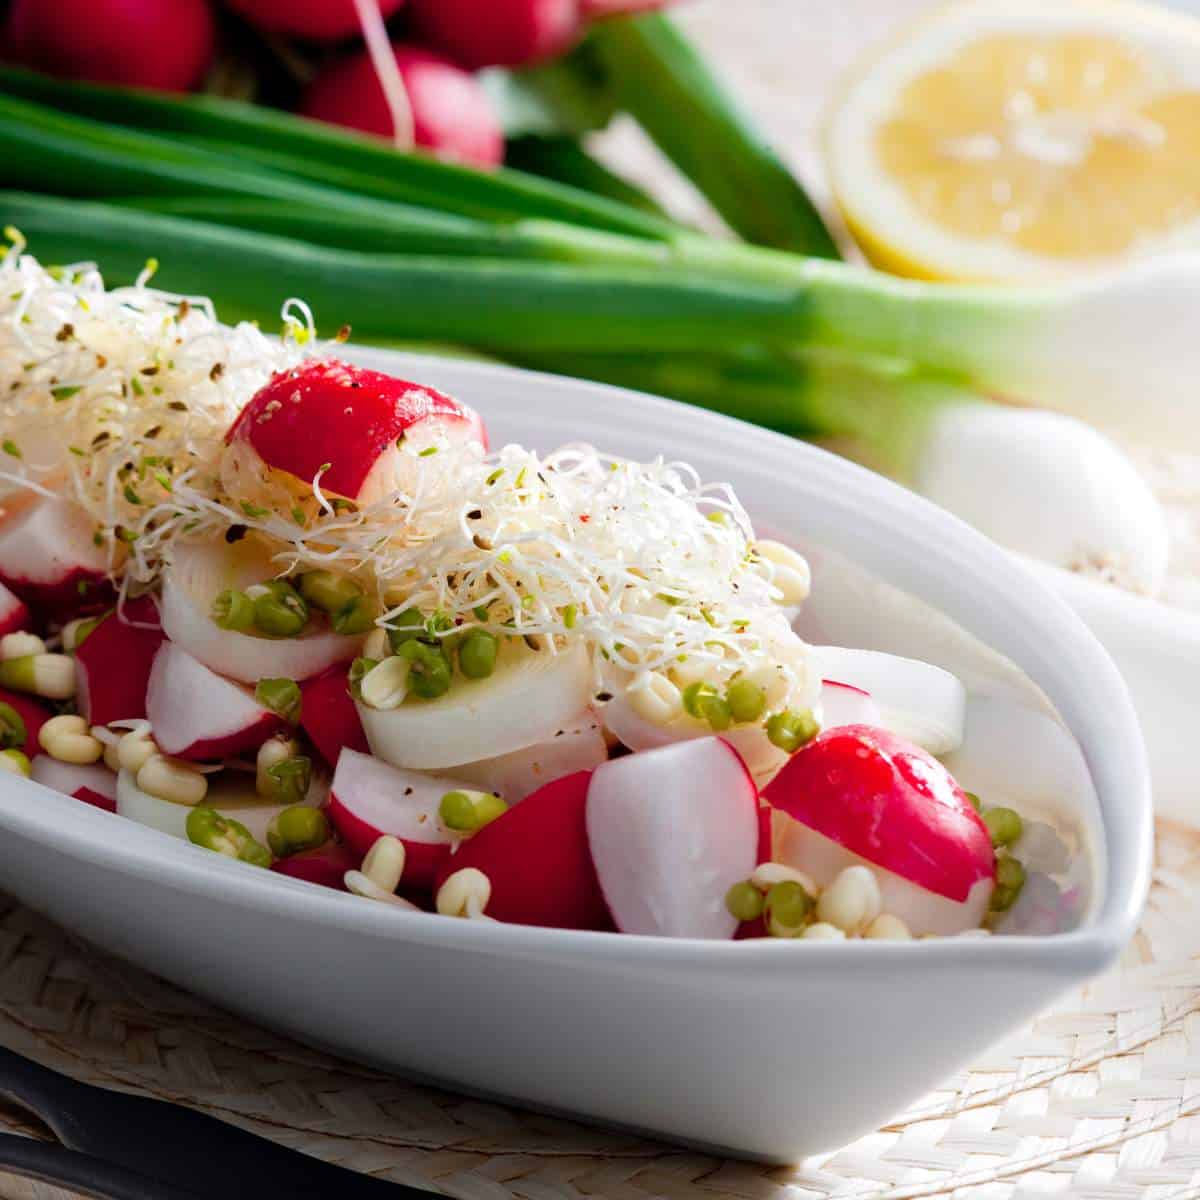 A white bowl filled with radishes, alfalfa sprouts, and other vegetables.